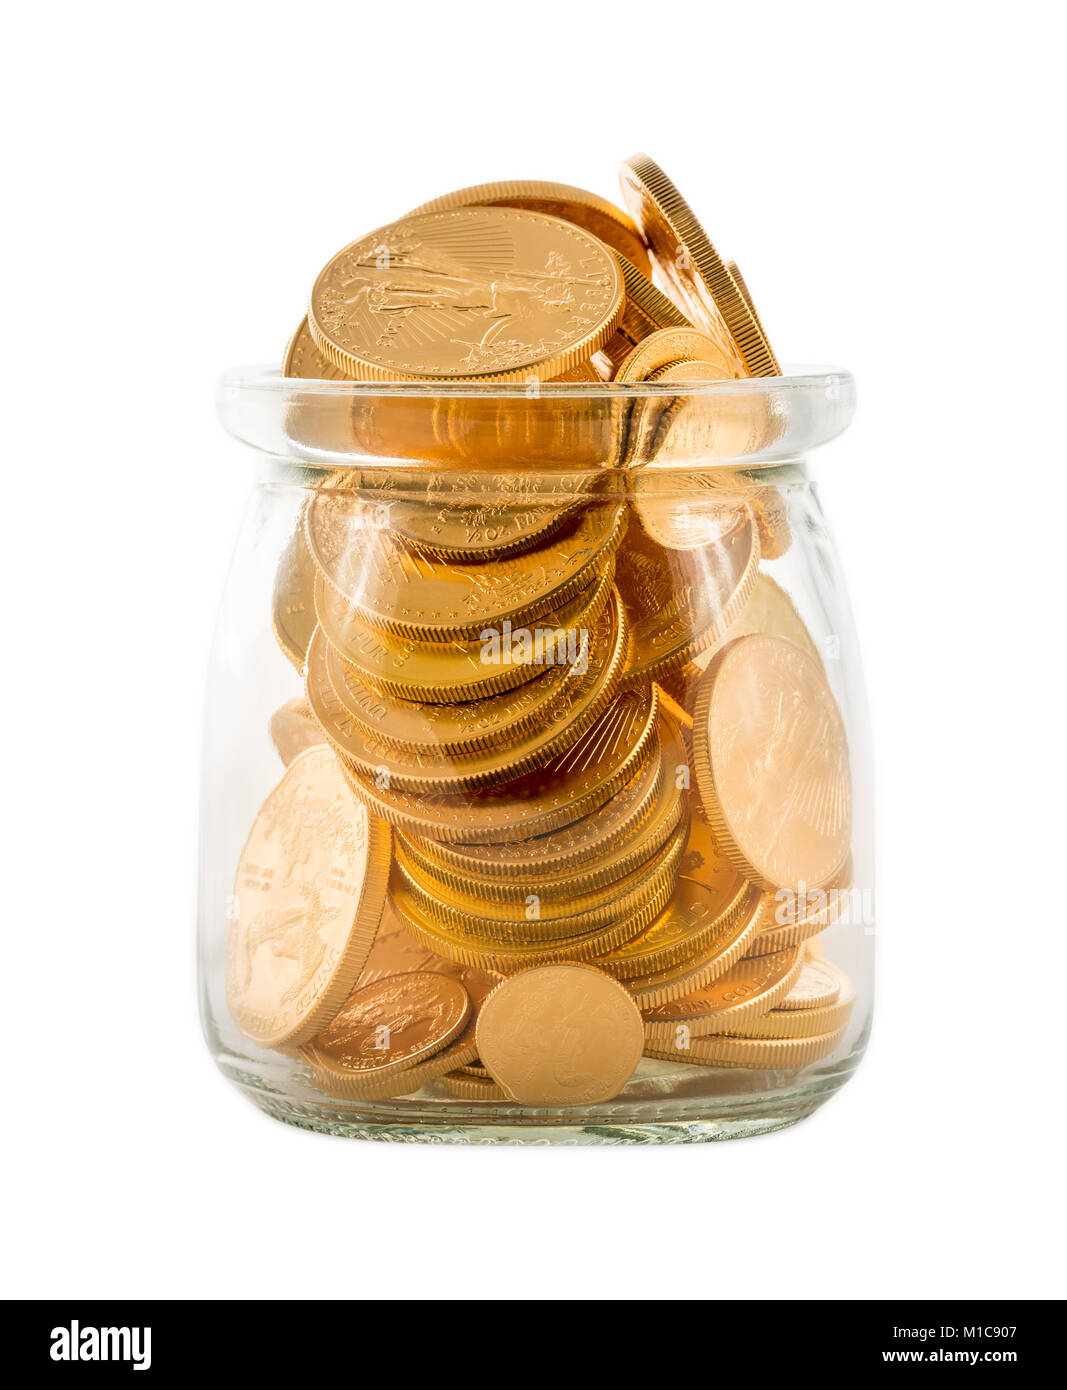 Gold coins inside glass jar to represent savings or investments Stock Photo